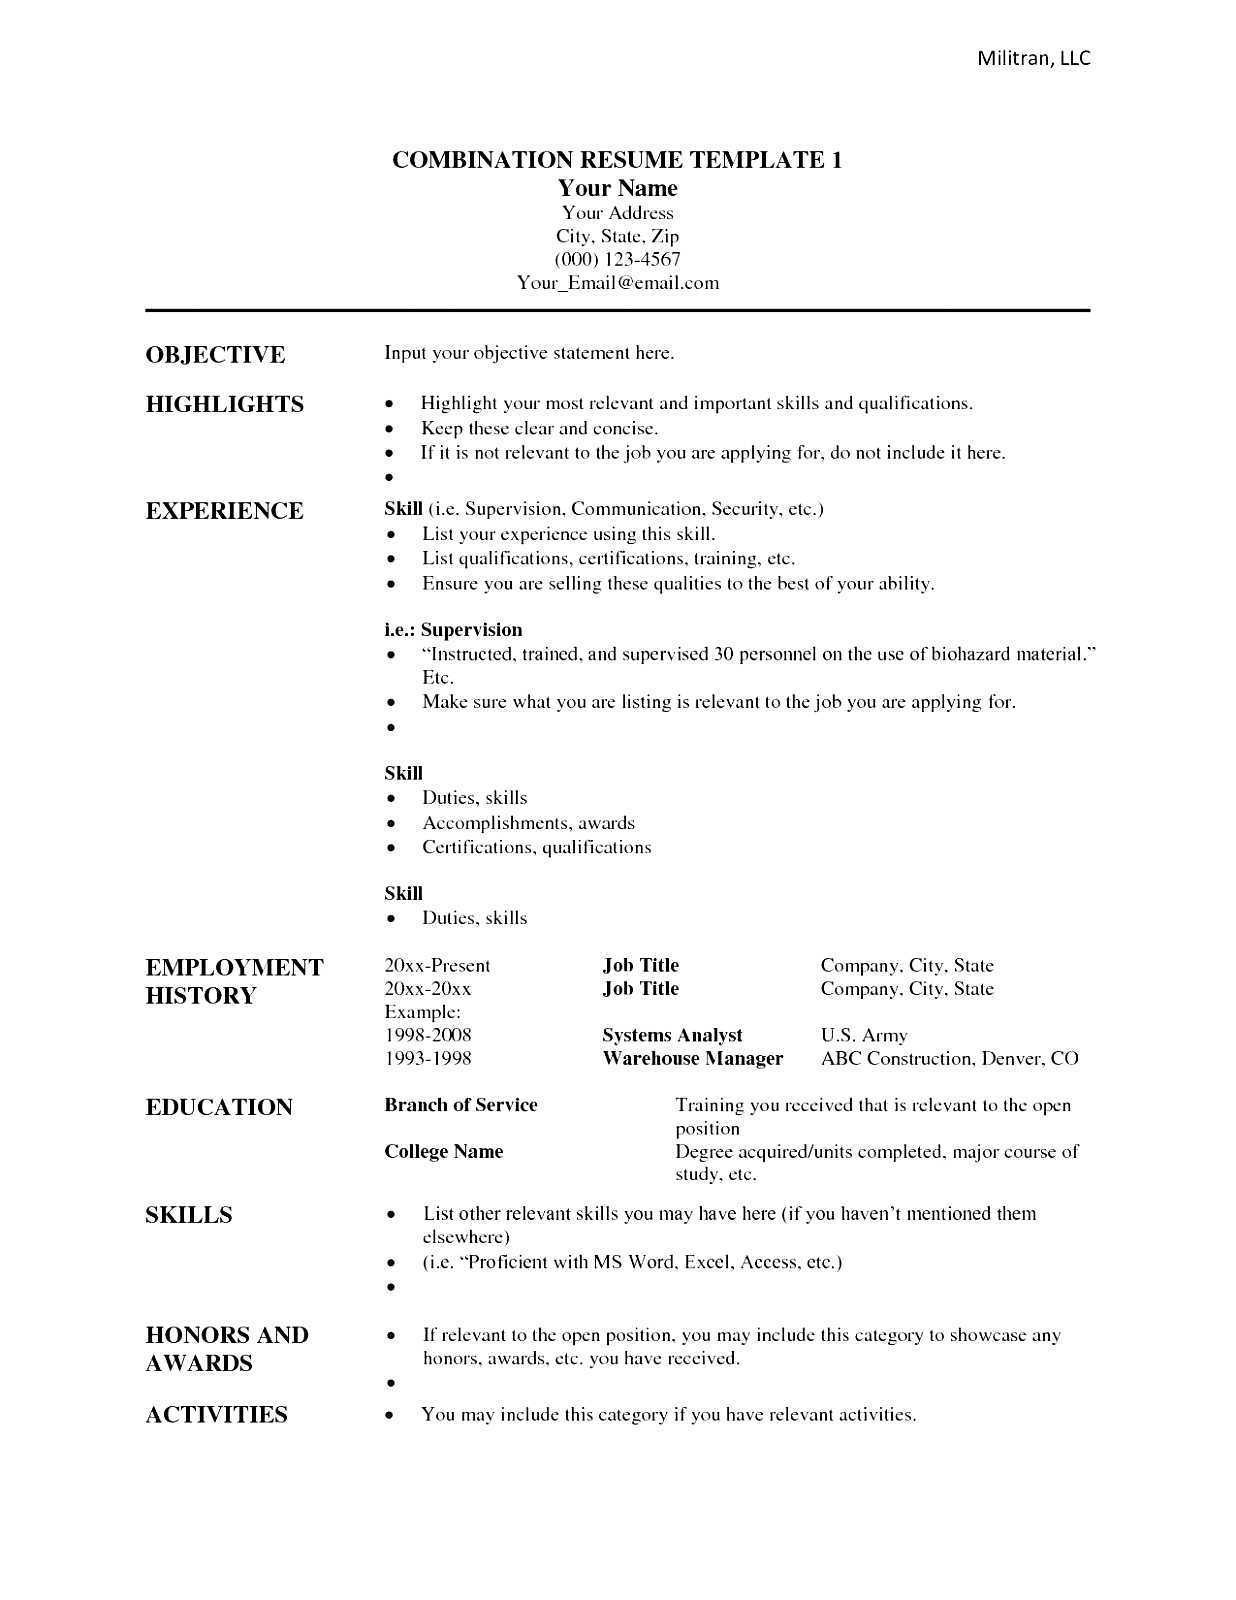 Functional Resume Template Google Docs Cv Mila Friedman With Combination Resume Template Word